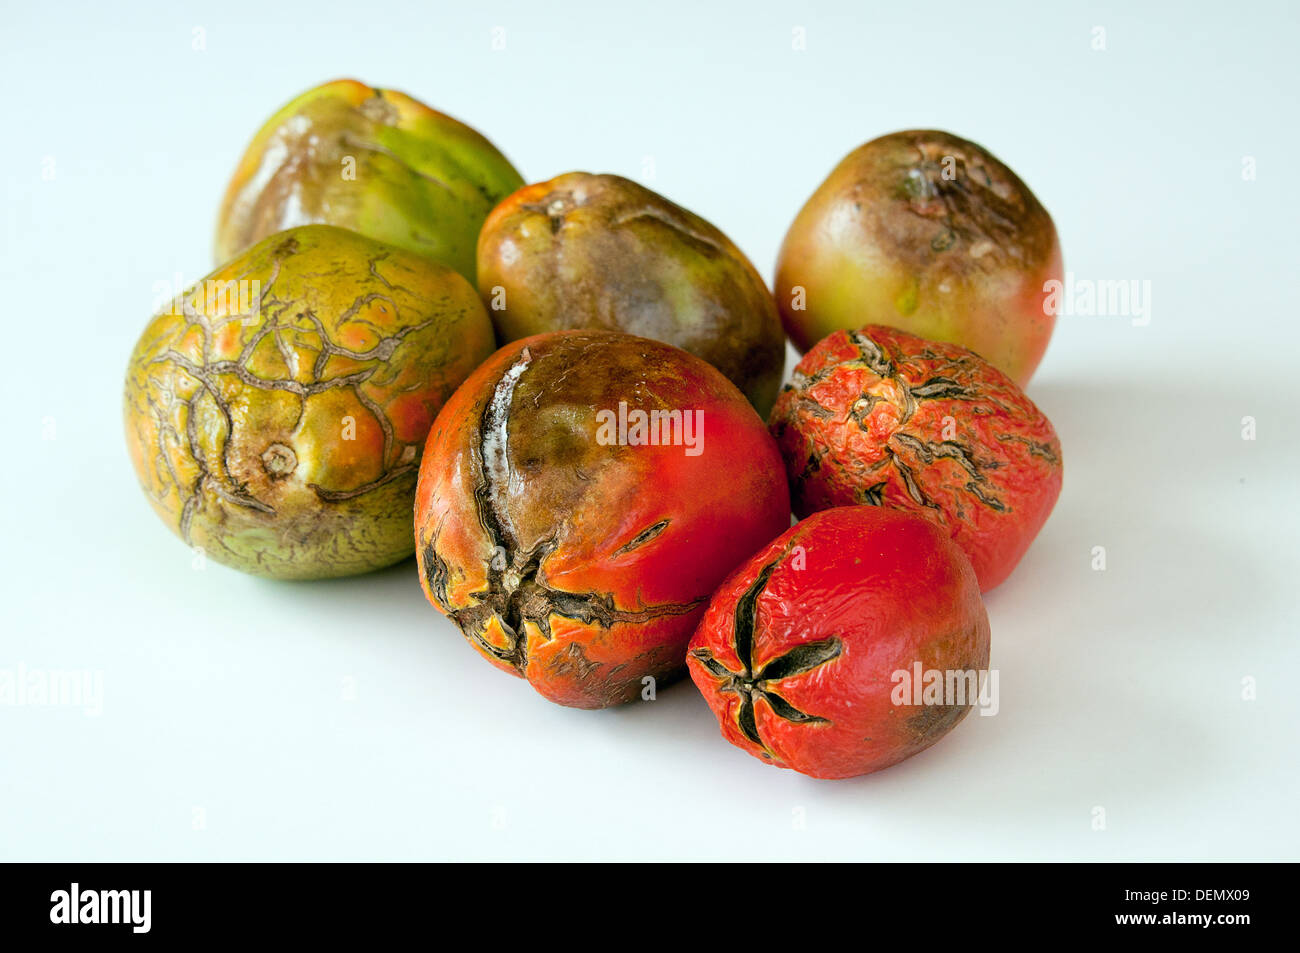 Several rotten tomatoes on a white background Stock Photo